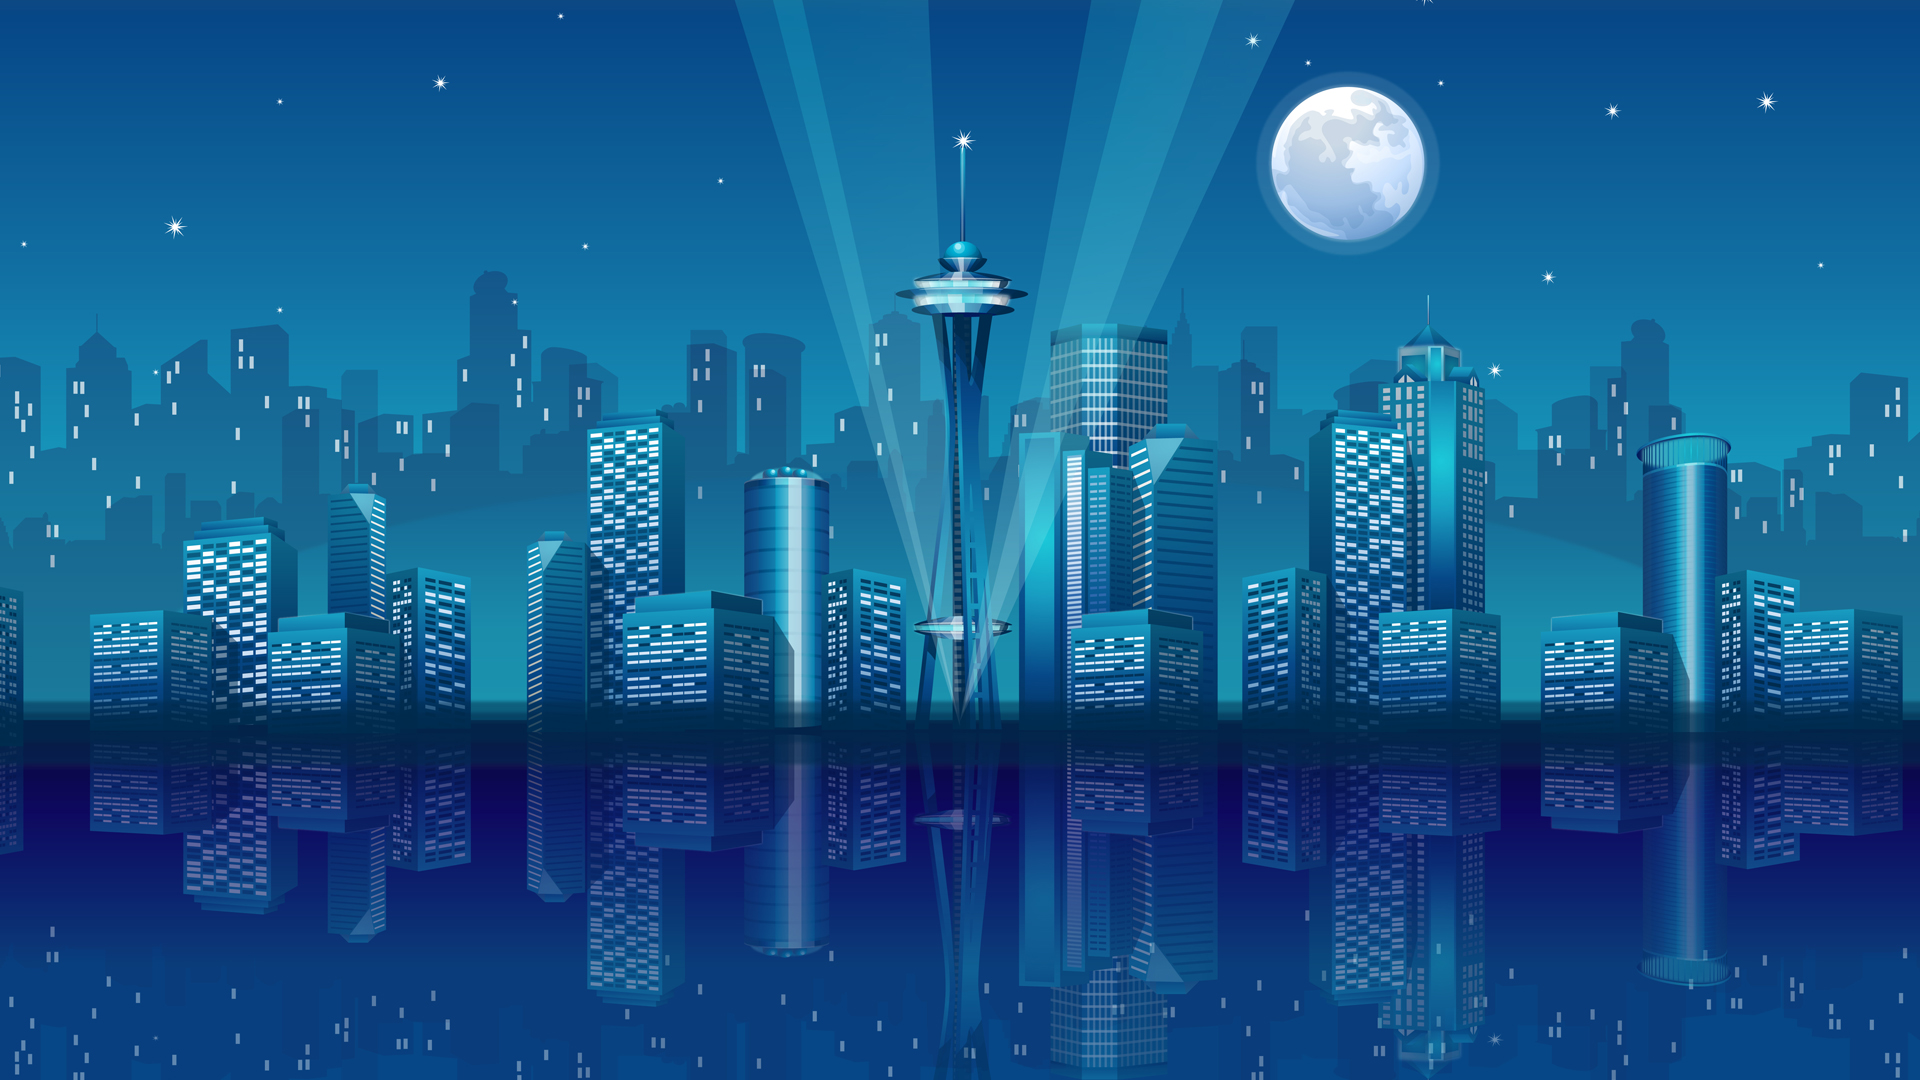 Discover the beauty of our Vector city wallpapers, carefully selected for their breathtaking scenery and unique designs that capture the essence of the city. Our wide array of Vector wallpapers is sure to evoke excitement and adventure, giving your device a new sense of elegance and vibrancy. Check out our Vector city wallpapers now!